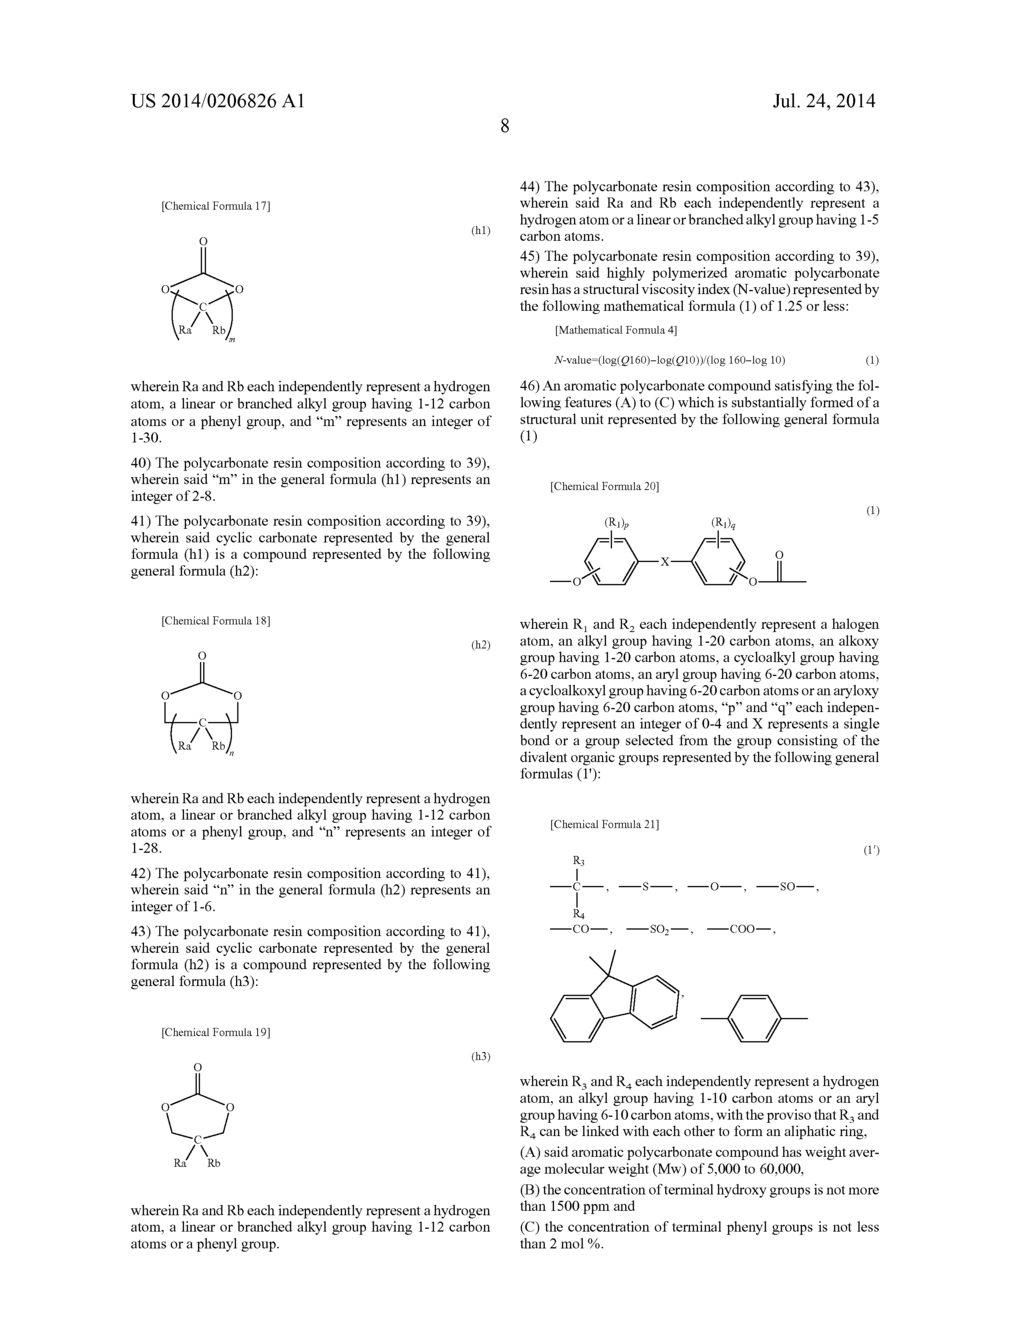 HIGH-FLUIDITY POLYCARBONATE COPOLYMER, PROCESS FOR PRODUCTION HIGHLY     POLYMERIZED AROMATIC POLYCARBONATE RESIN AND AROMATIC POLYCARBONATE     COMPOUND (AS AMENDED) - diagram, schematic, and image 16